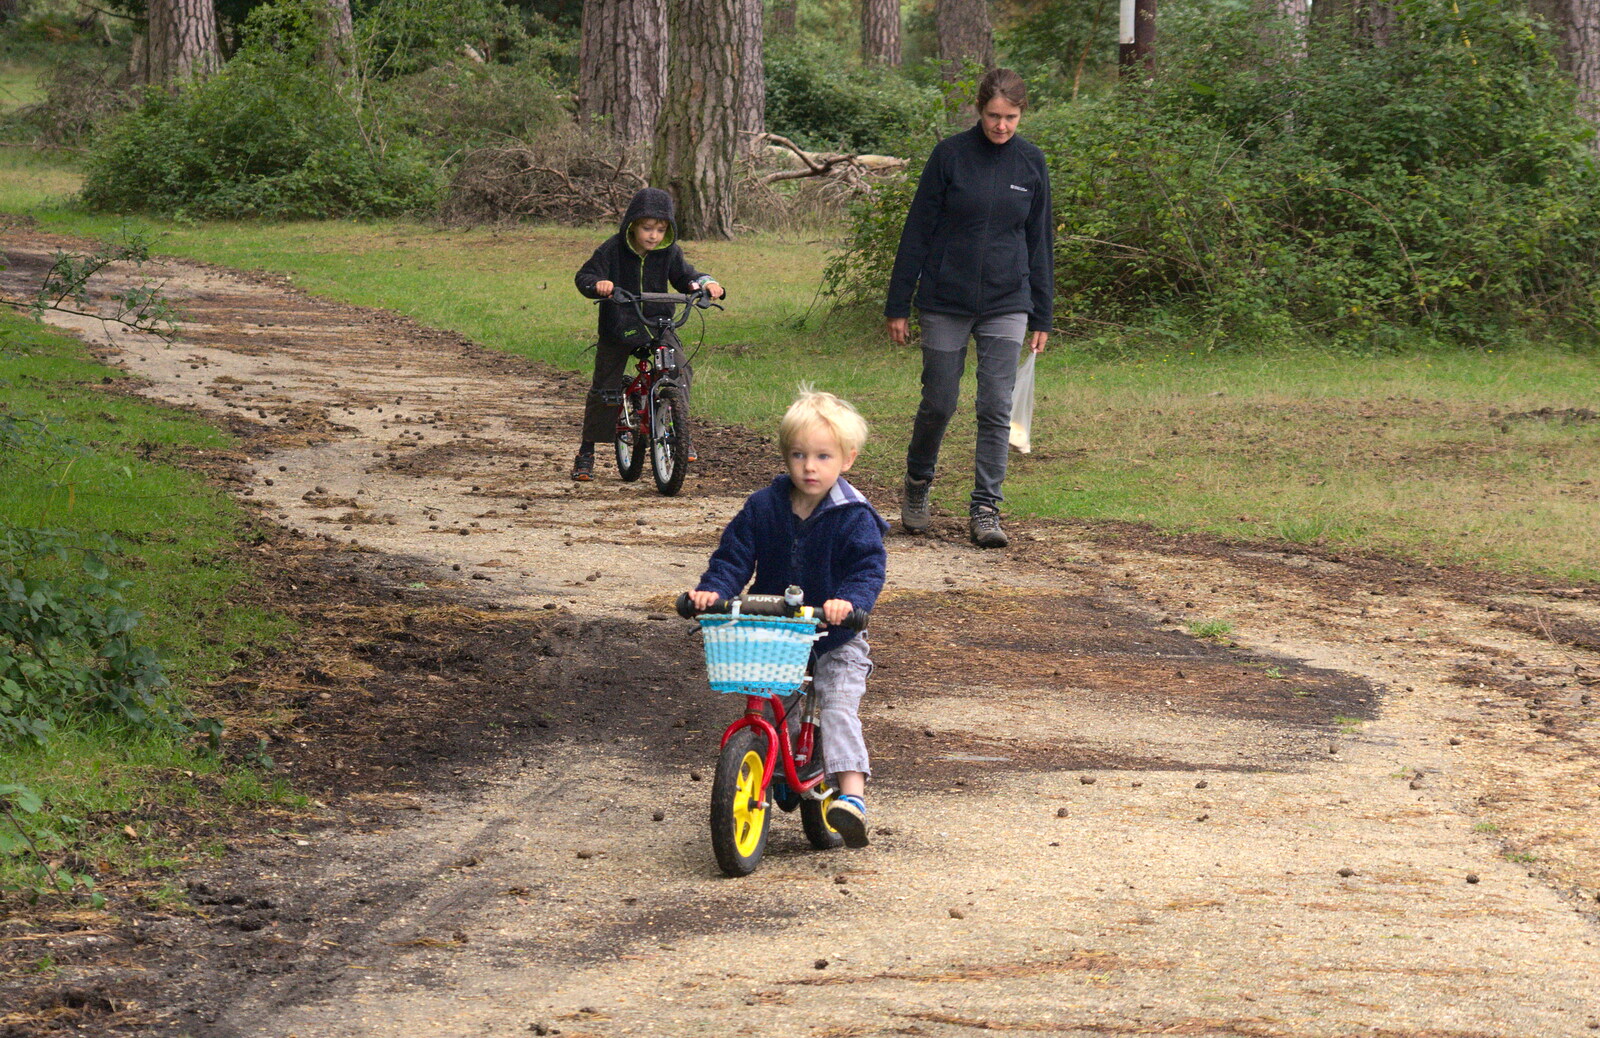 Harry on his balance bike from Camping at Roundhills, Brockenhurst, New Forest, Hampshire - 29th August 2015